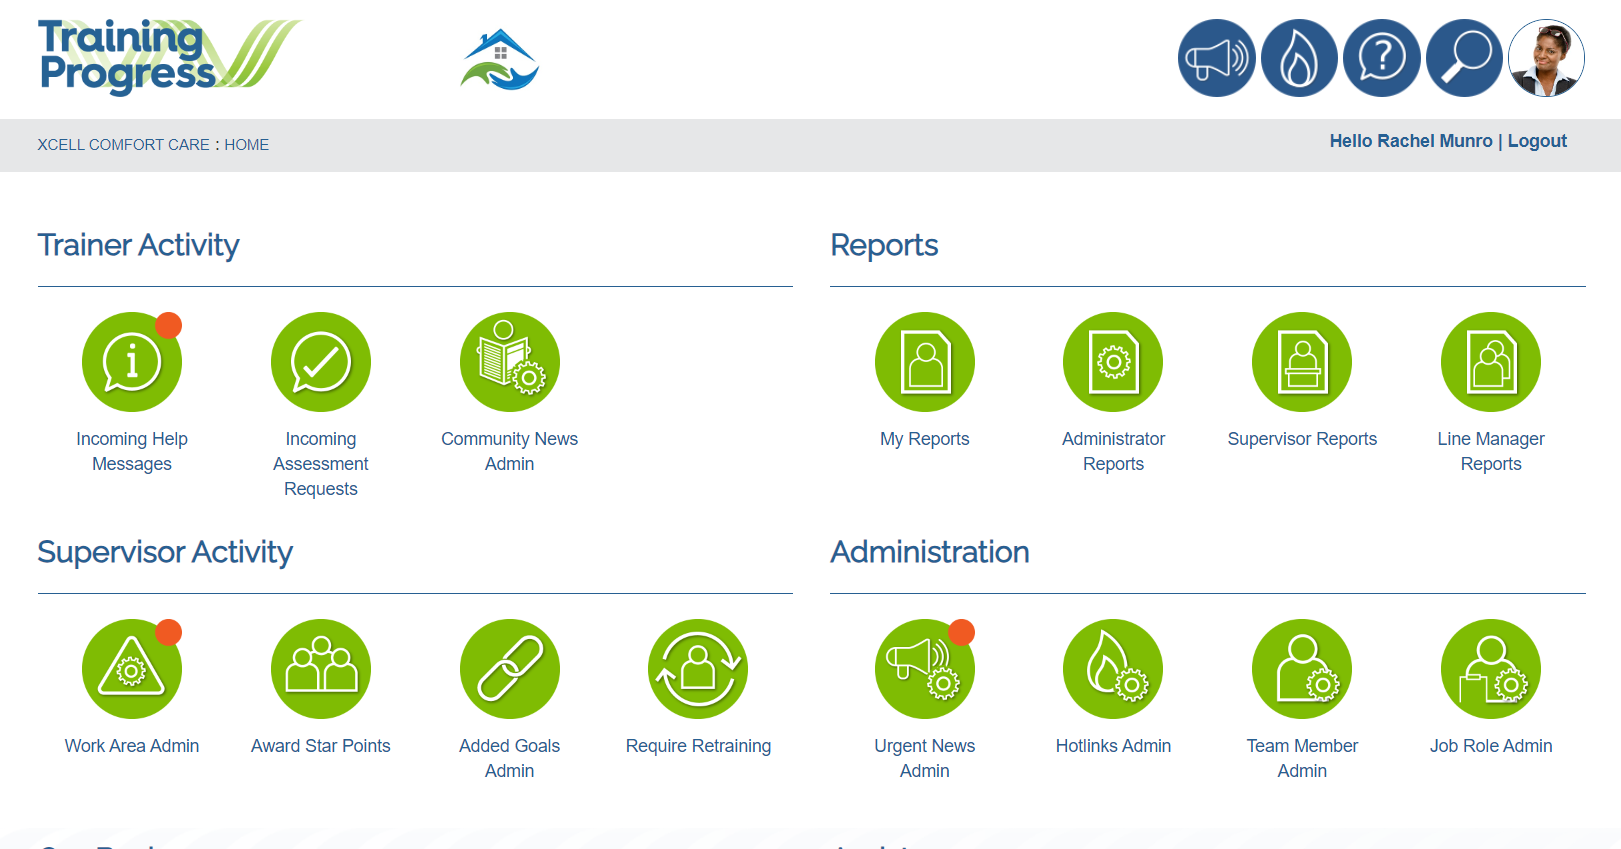 Homepage of System admin showing supervisor activity buttons (Work area admin, star awards, retraining and added goals admin). Administration buttons (for Hotlinks, team member admin, job role admin and urgent news admin).